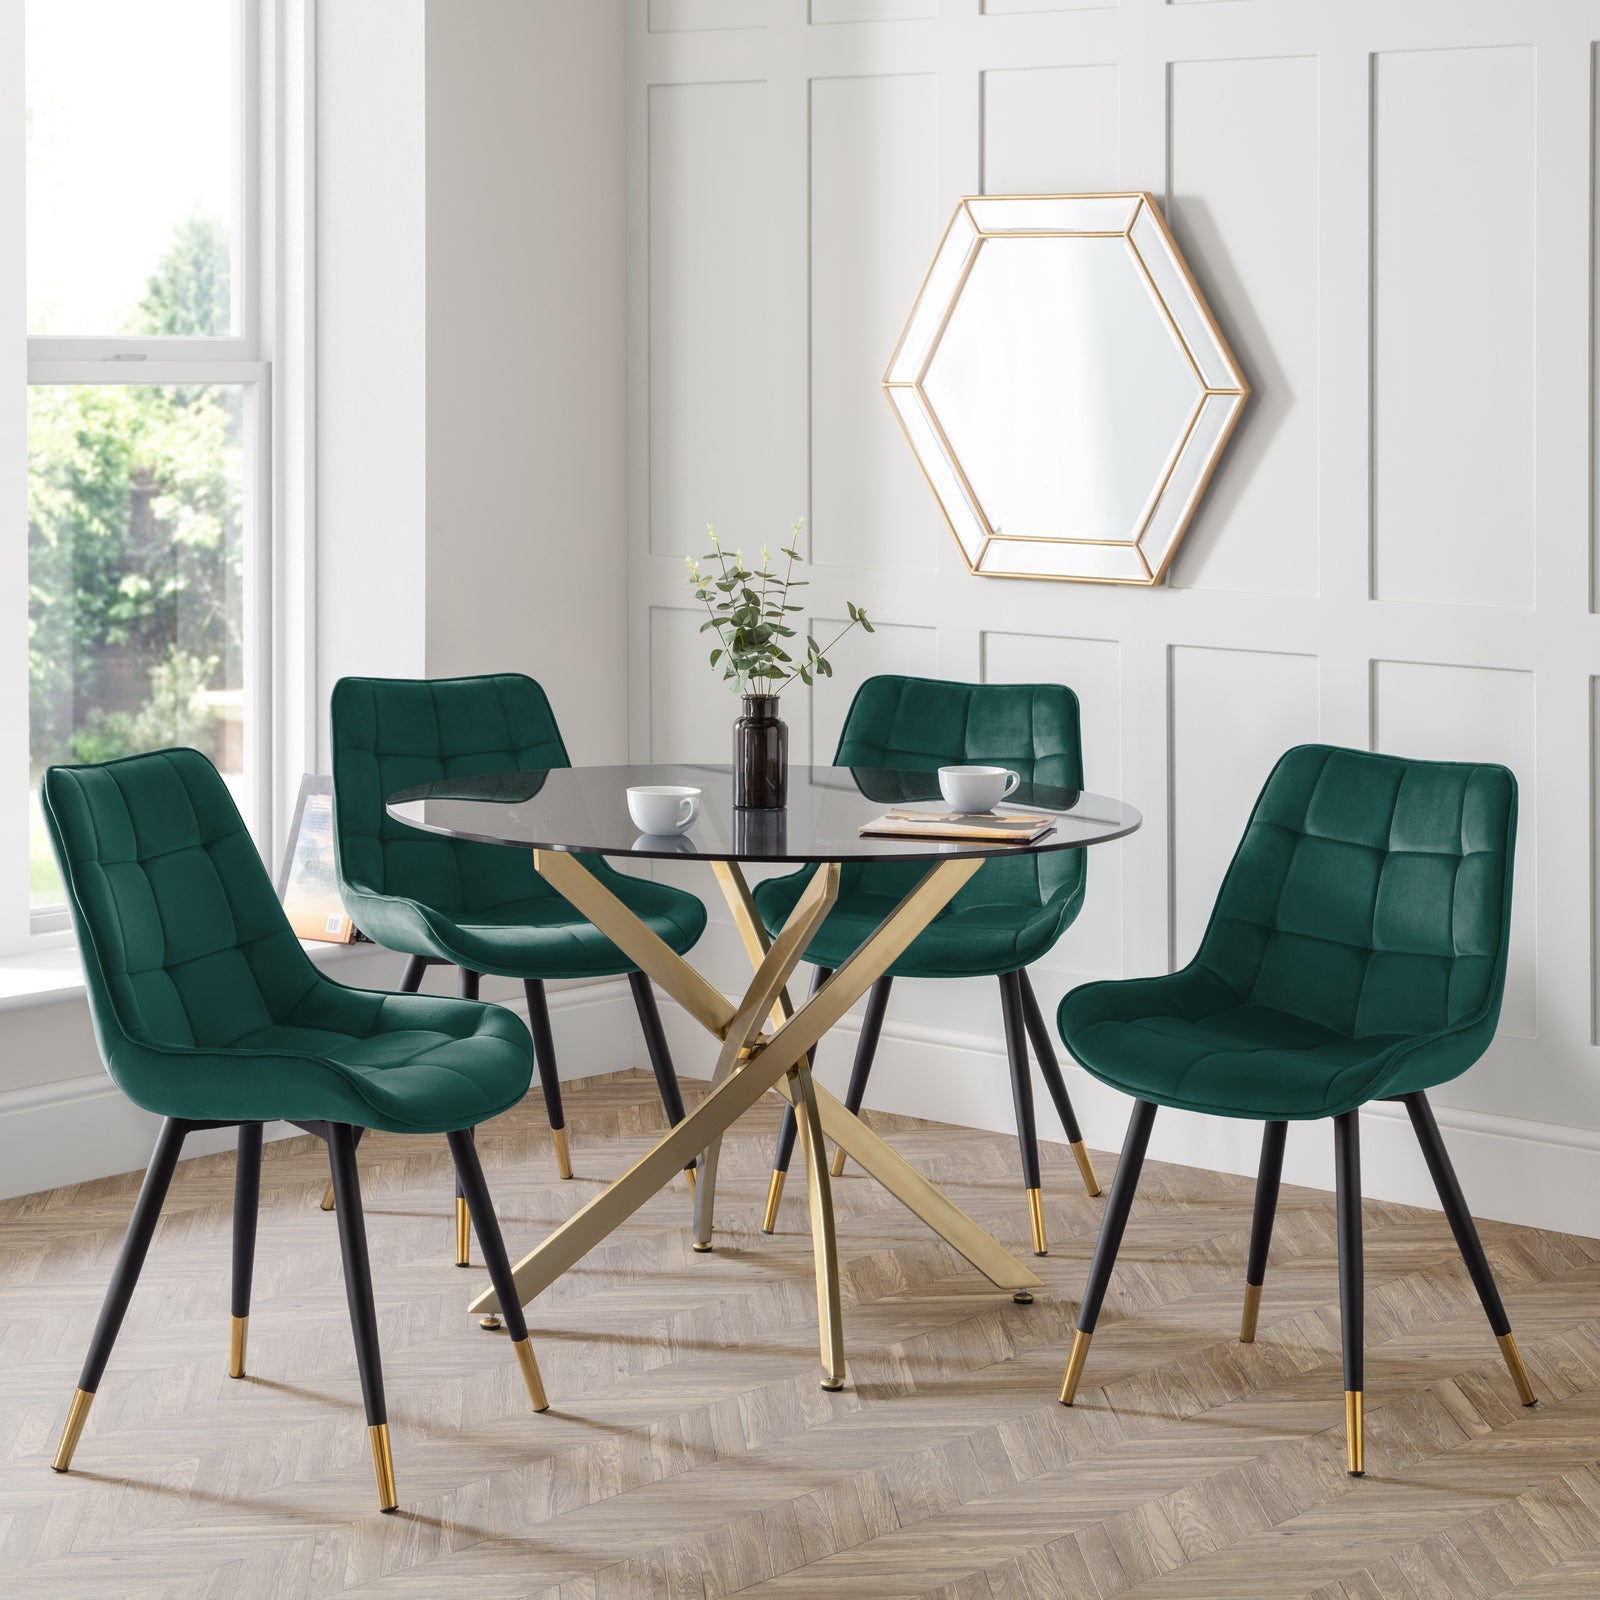 Montero Round Glass Top Dining Table With 4 Hadid Chairs Greencleargold